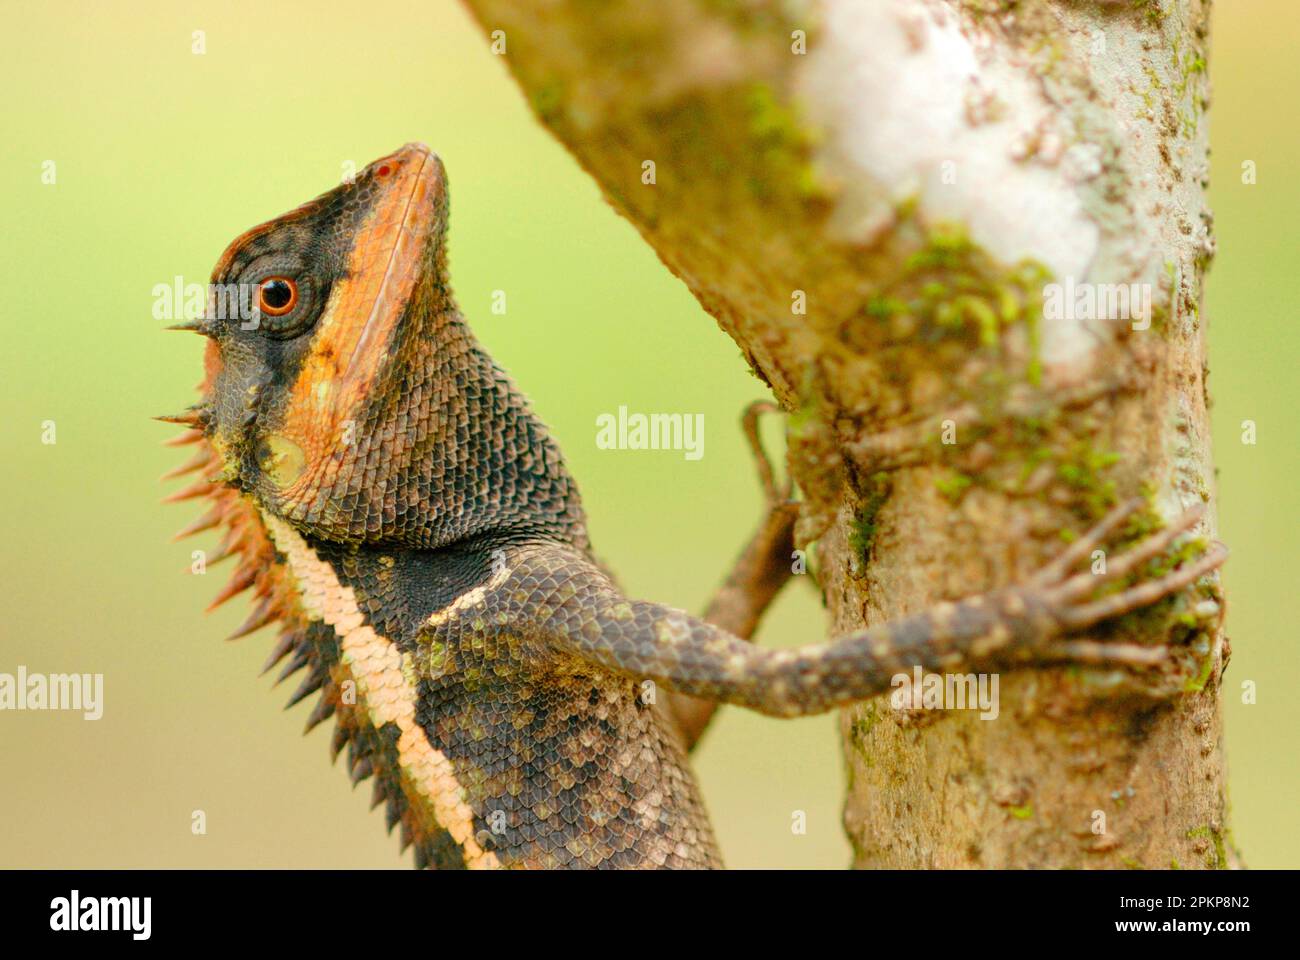 Forest Crested Agama (Calotes emma) adult, clinging to branch in rainforest, Khao Sok N. P. Southern Thailand Stock Photo